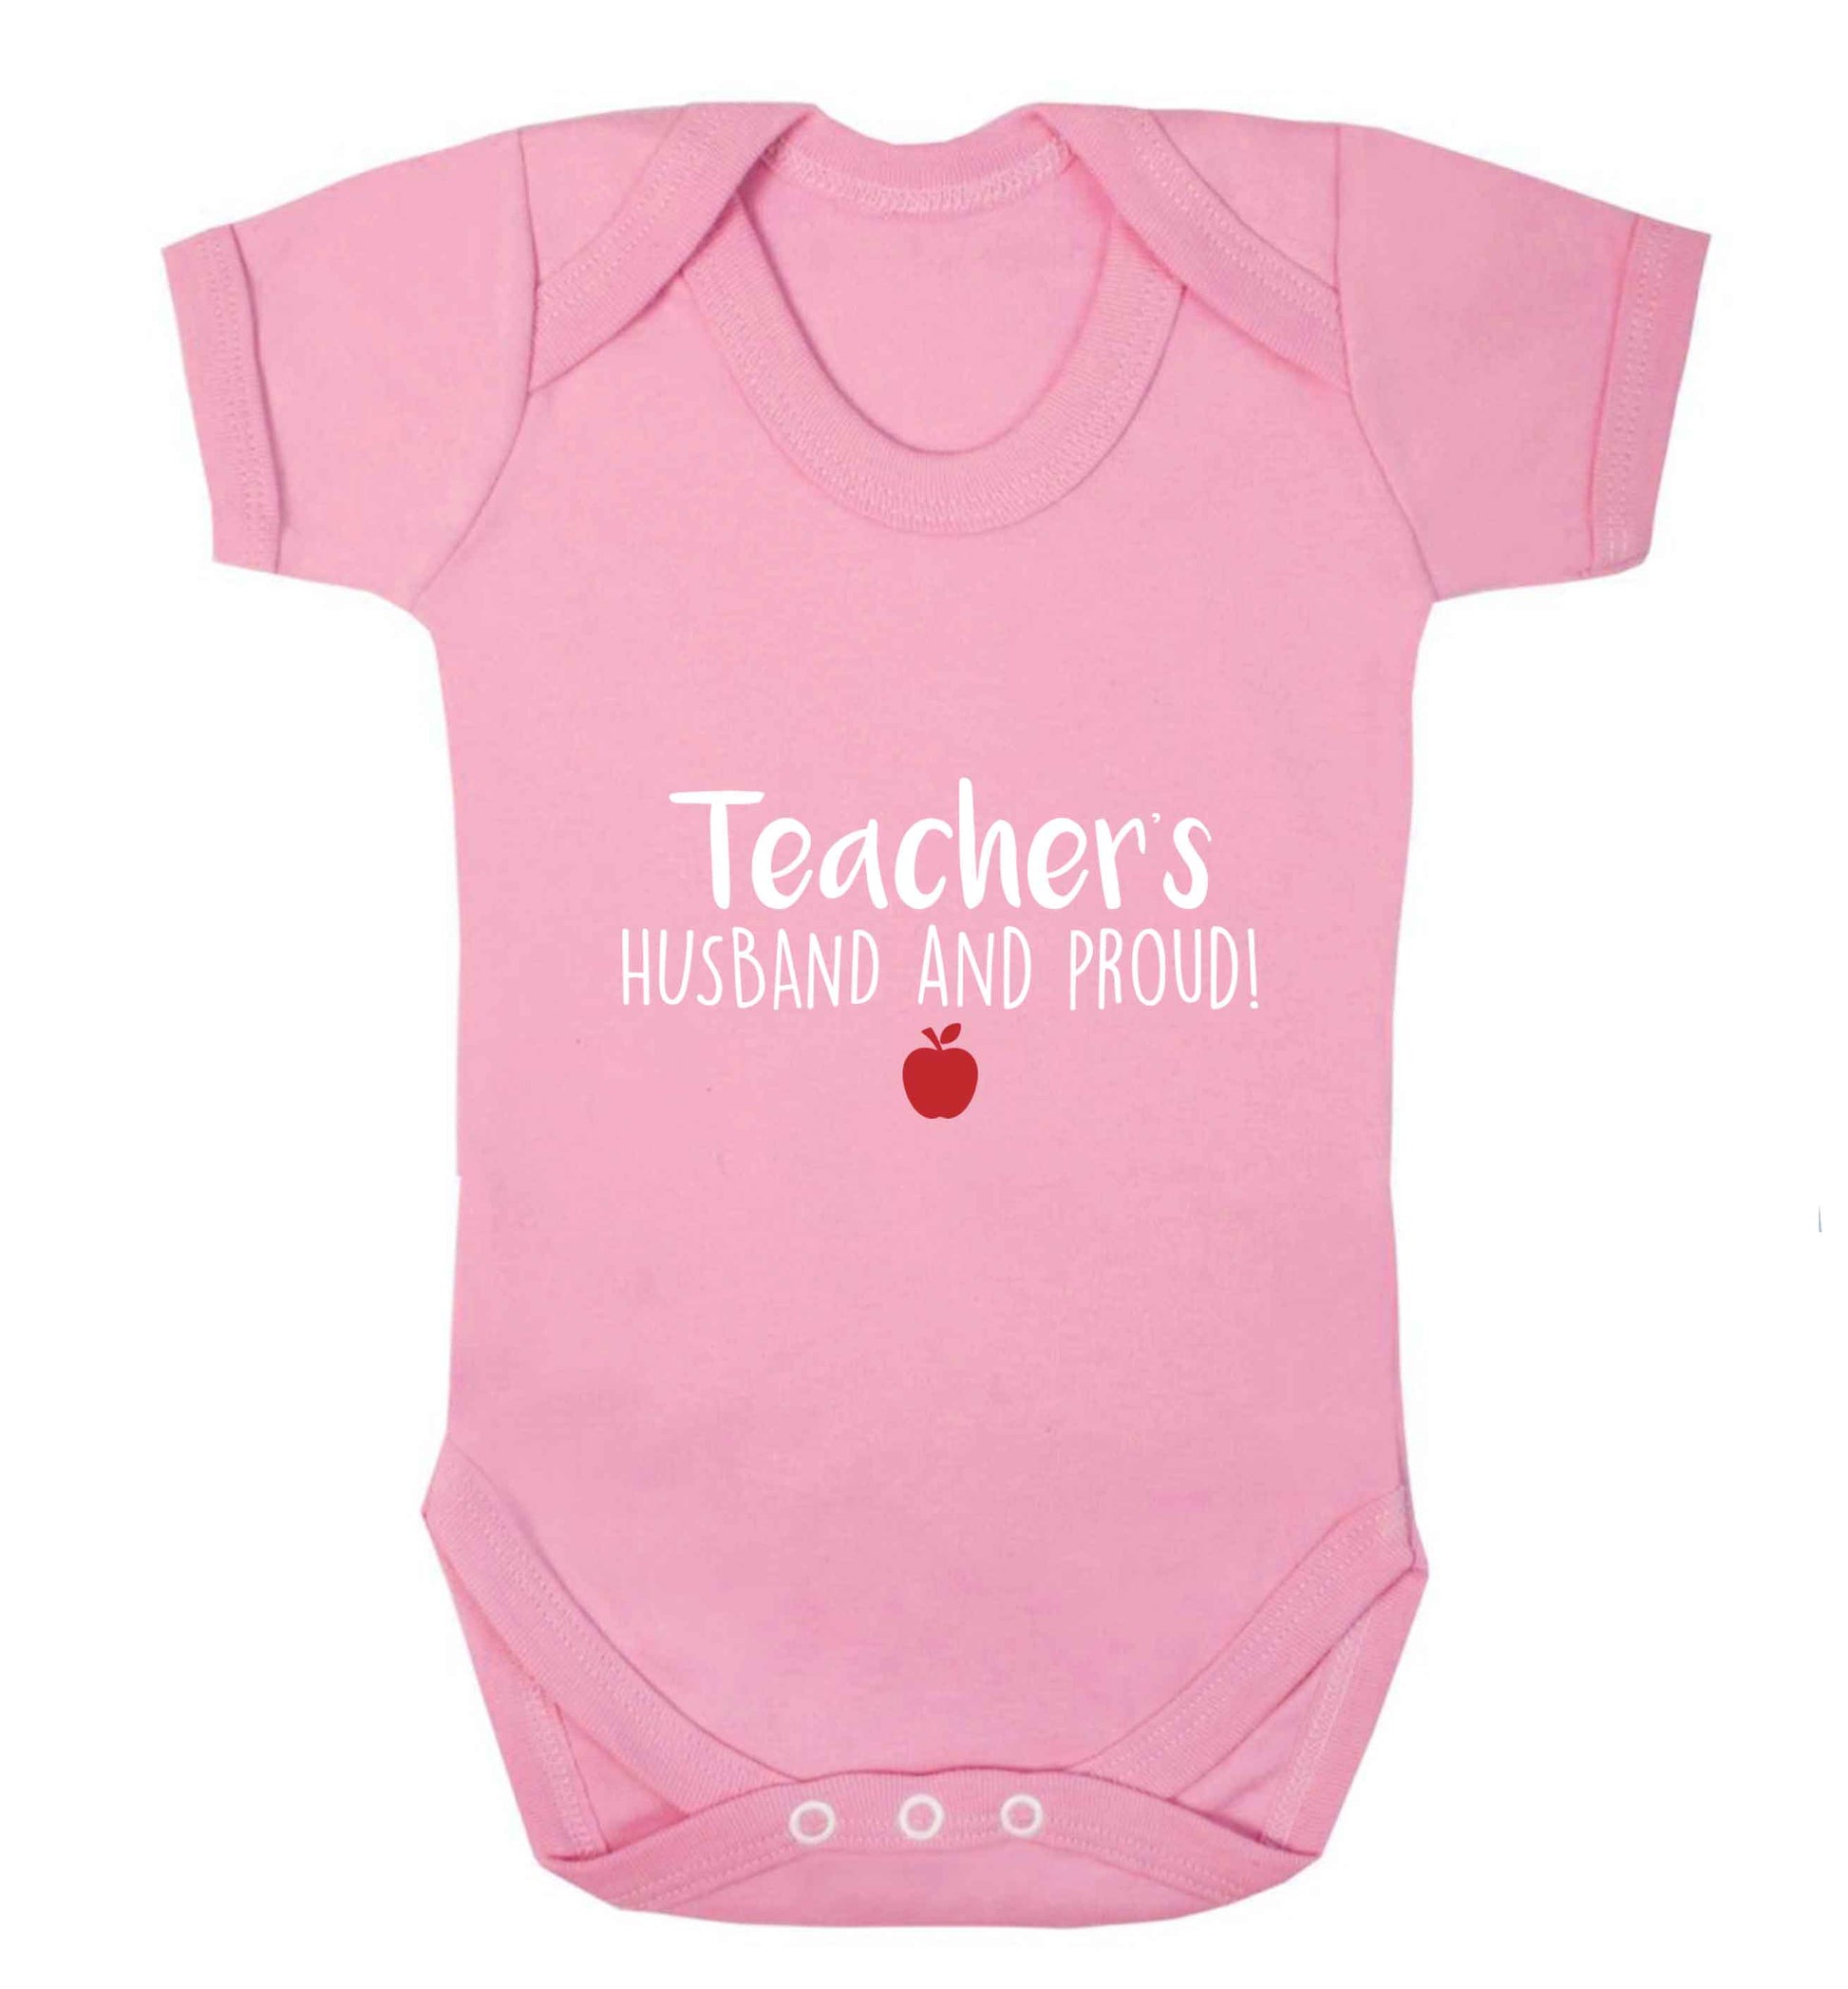 Teachers husband and proud baby vest pale pink 18-24 months